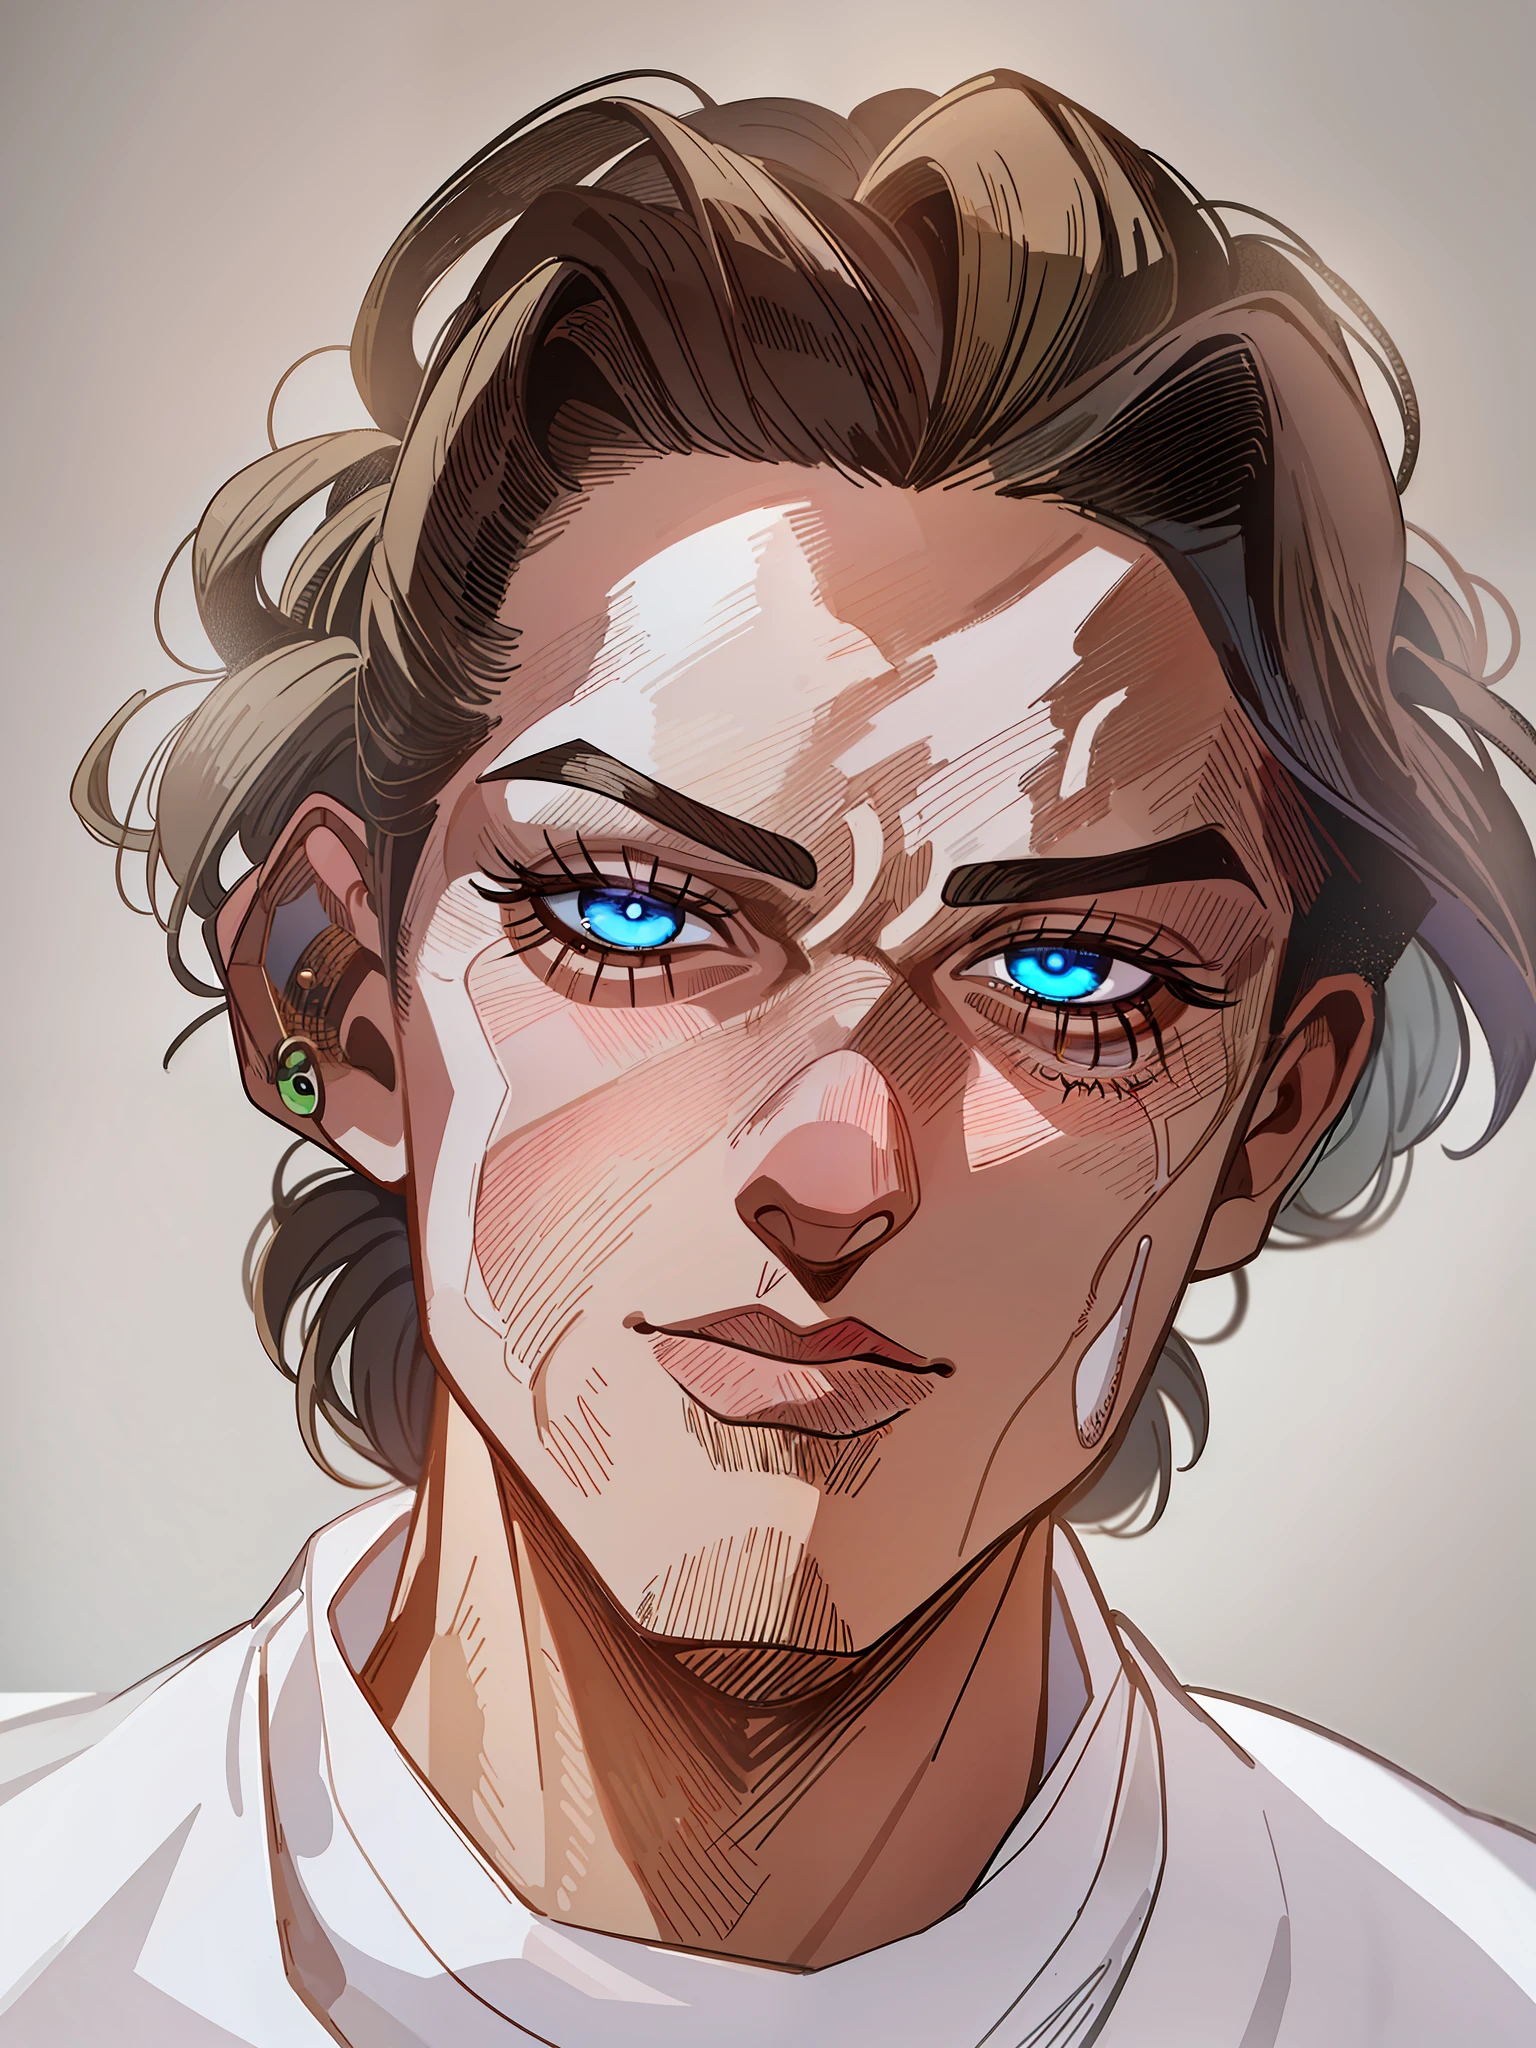 HD, (Best Detail) (Best Quality), Meticulous Facial Features, Arad Man with White Shirt and White Shirt, (JOJO), Yuhiko Araki